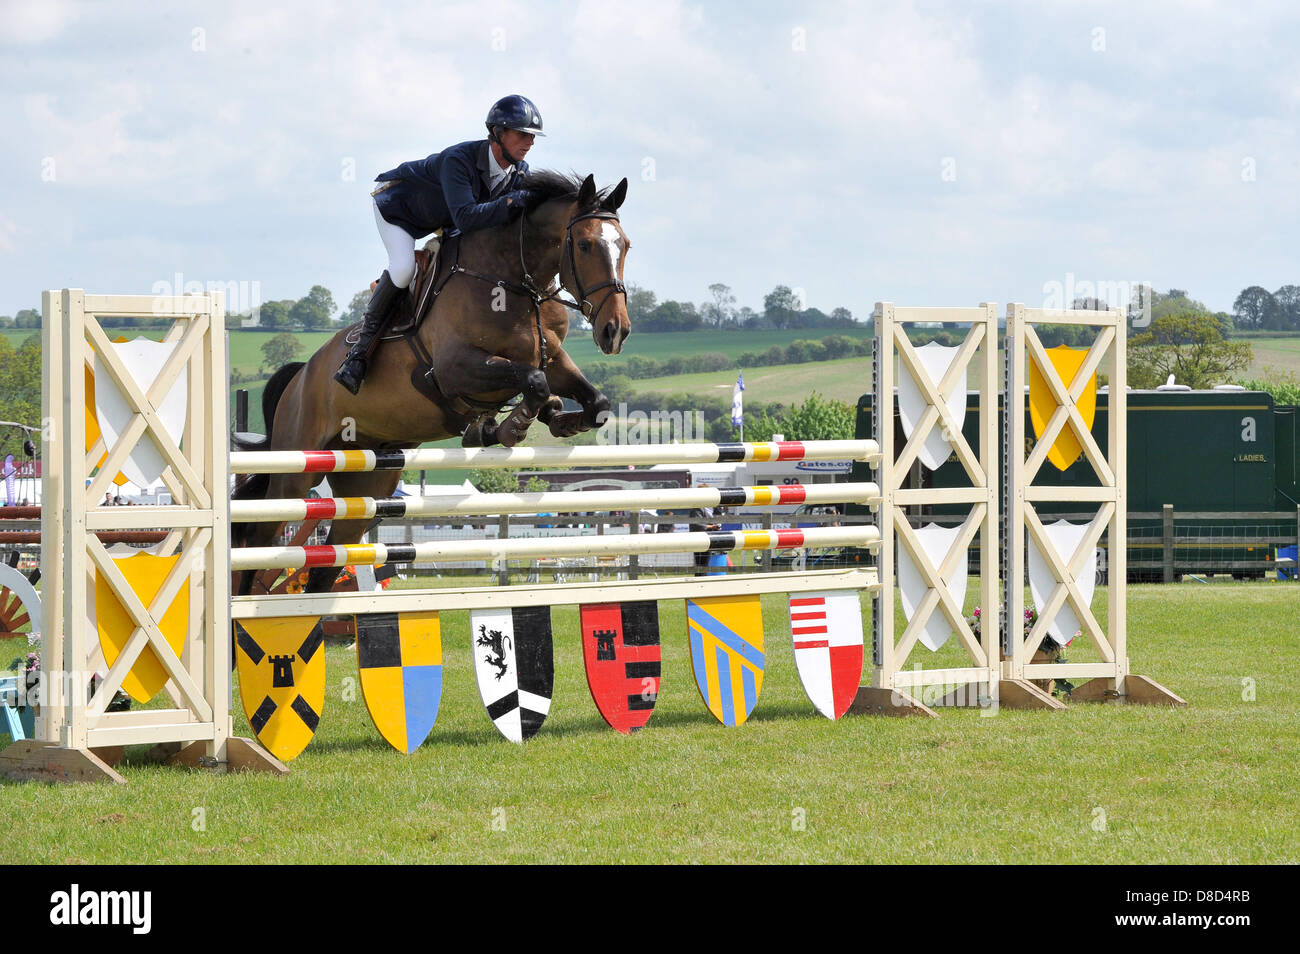 REDBOURN, UK. 25th May 2013. Show jumping at the Hertfordshire County Show. Phillip Miller rides Di and Pennie Cornish' horse Quizmaster II in the Foxhunter 1.20m Open class. Stock Photo